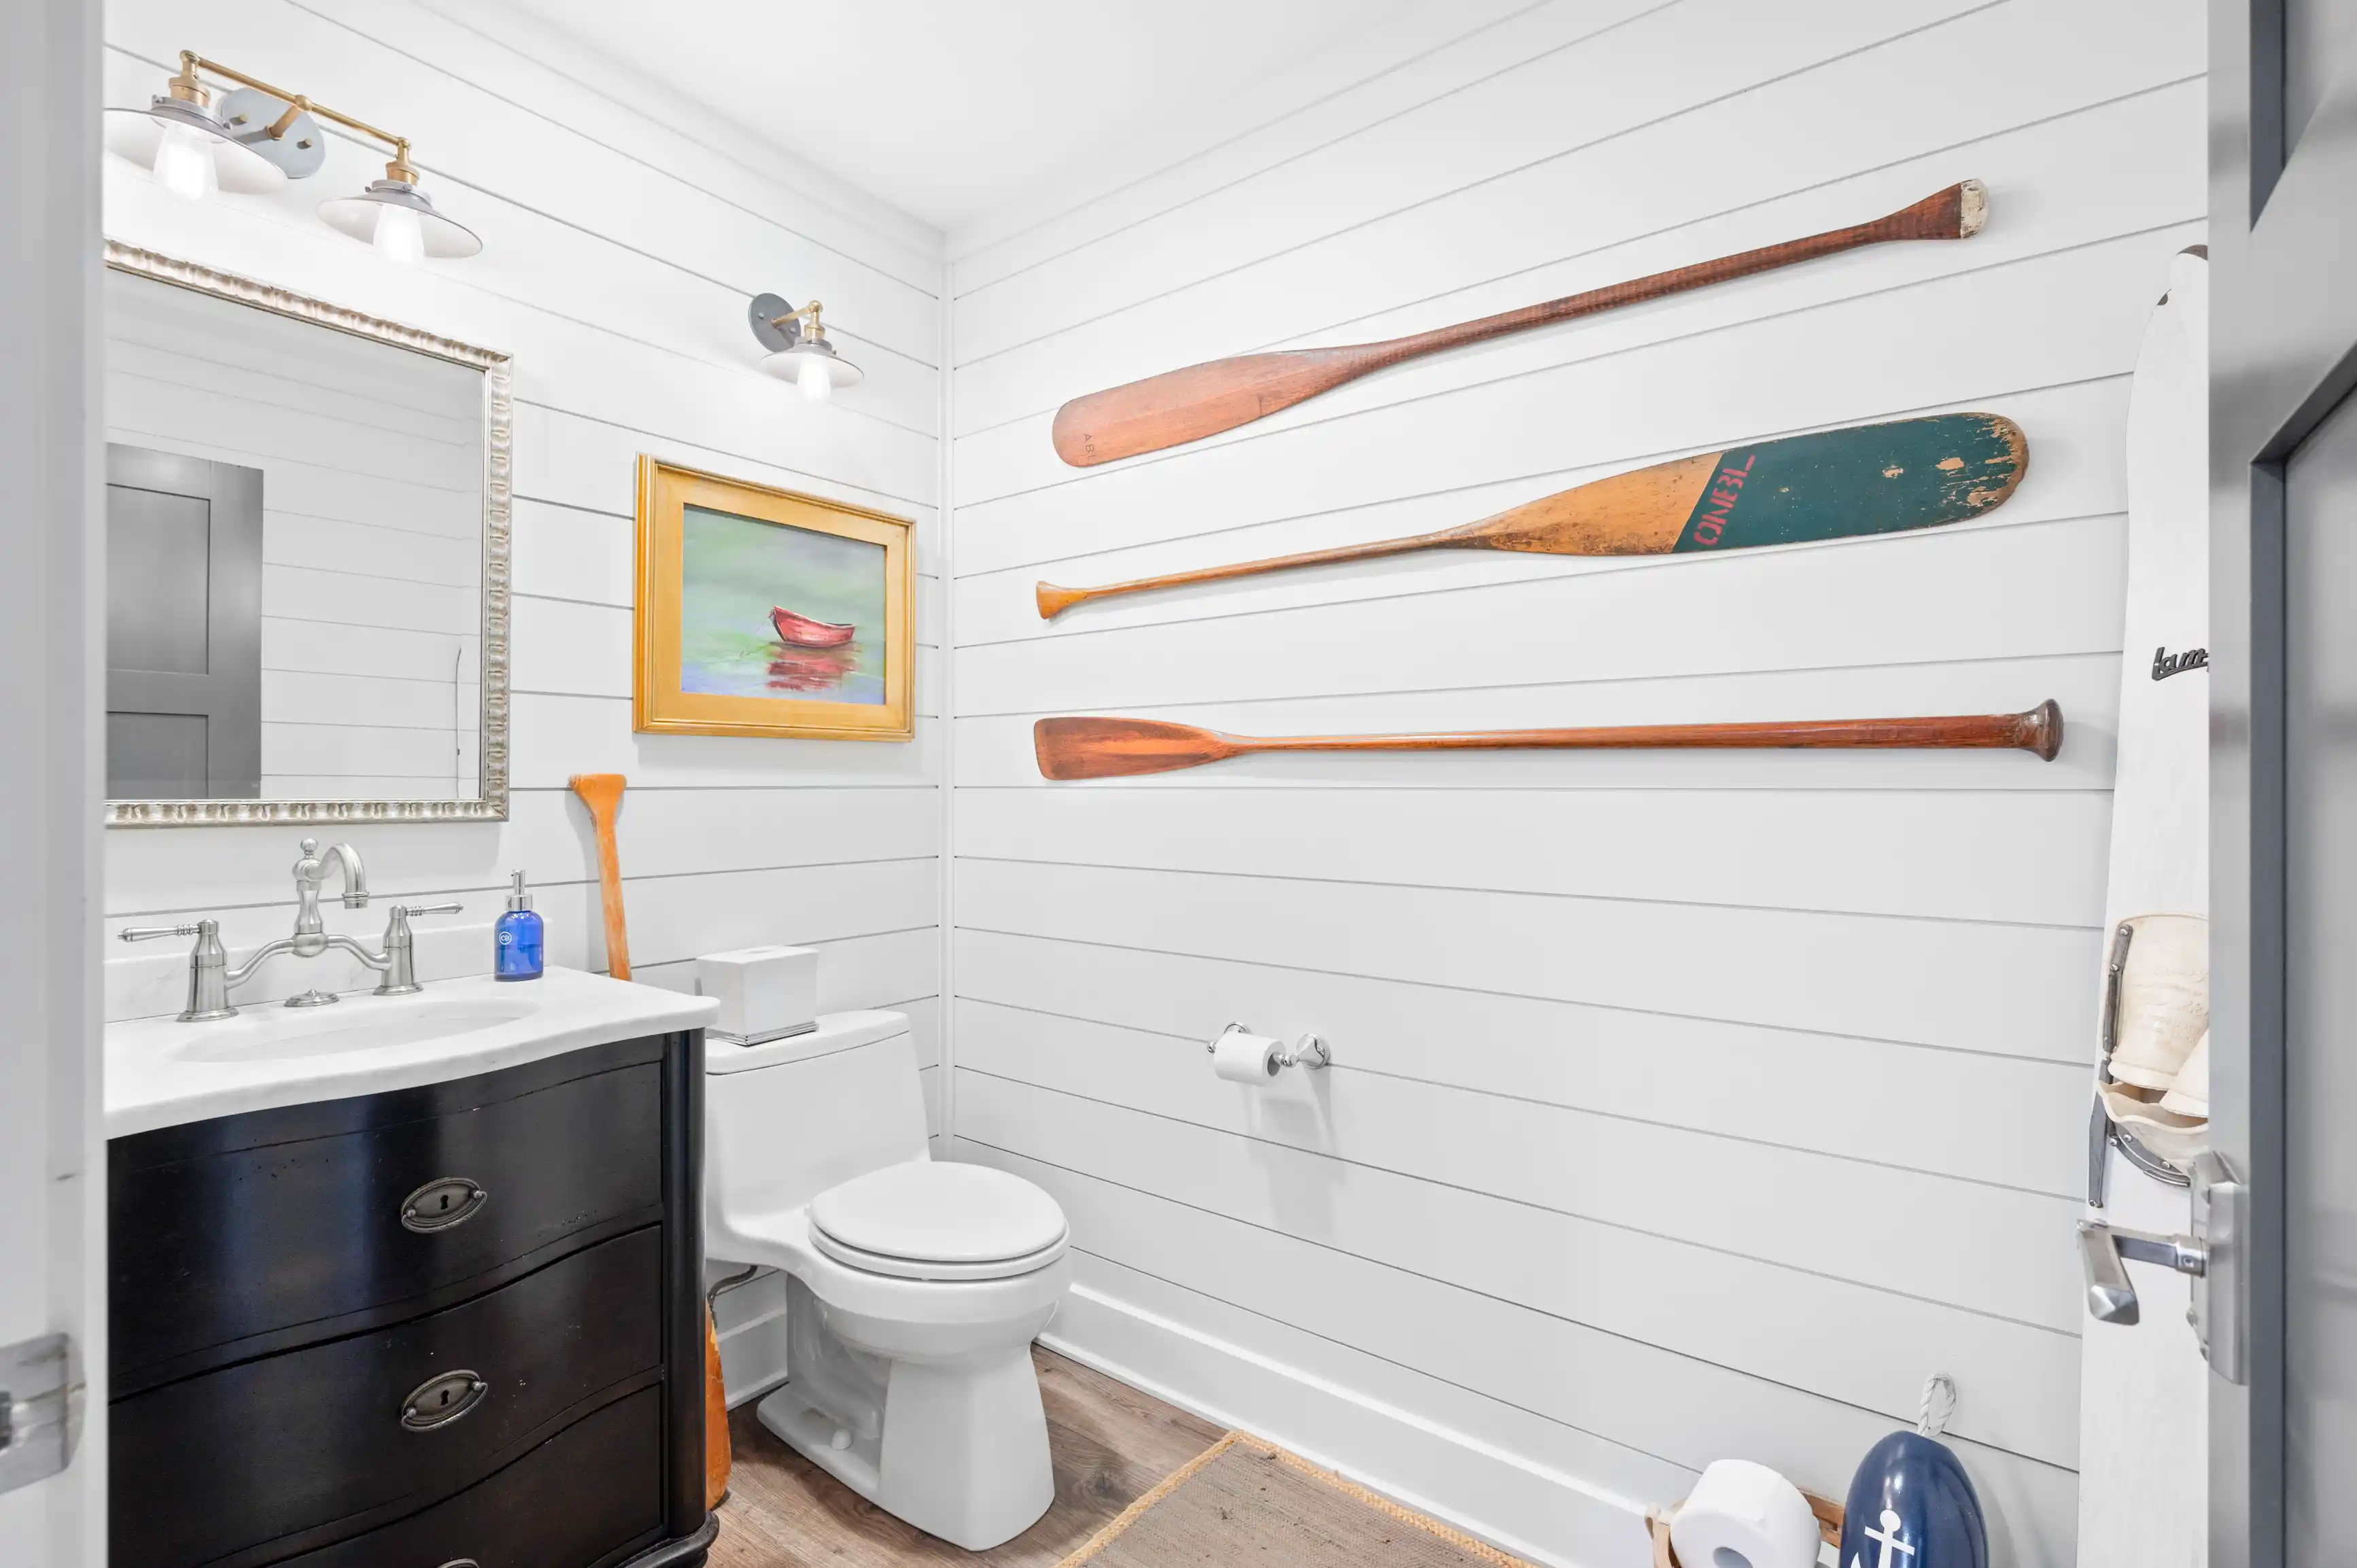 A nautical-themed bathroom with white shiplap walls, adorned with decorative oars, a framed painting of a boat, and maritime accessories.